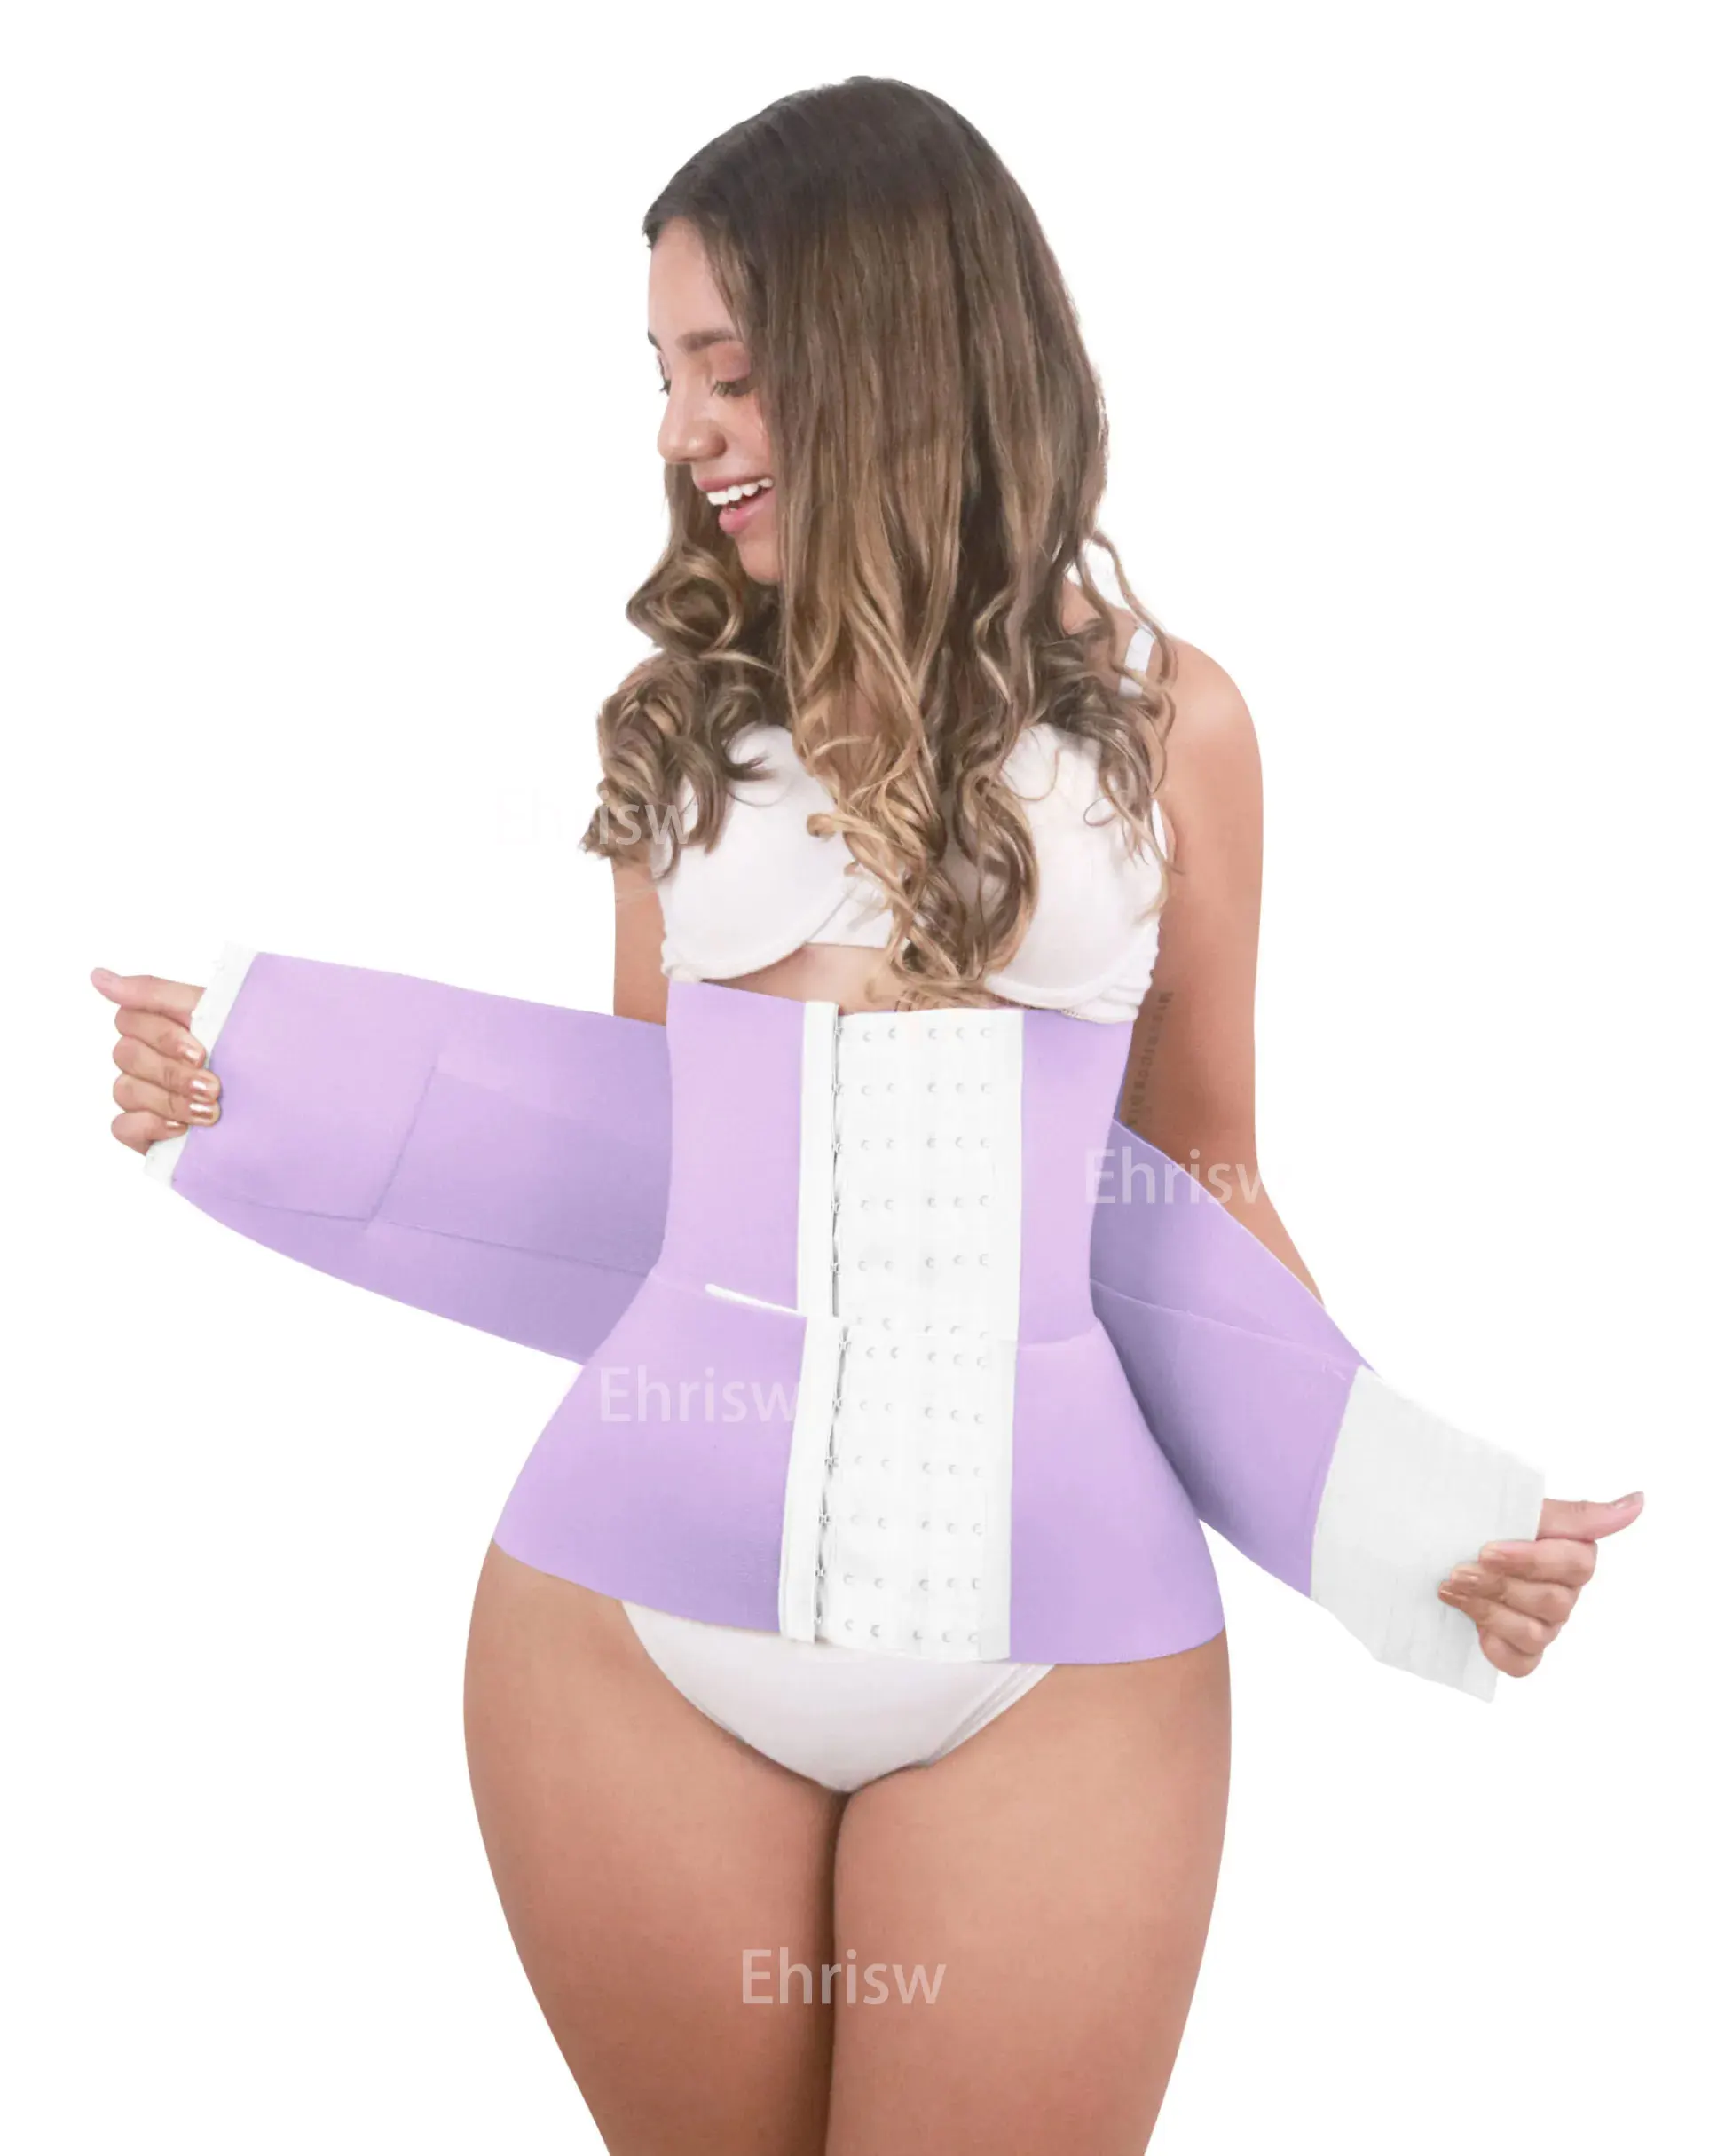 New Waist Trainer For Women Hourglass Adjustable Sports Girdle